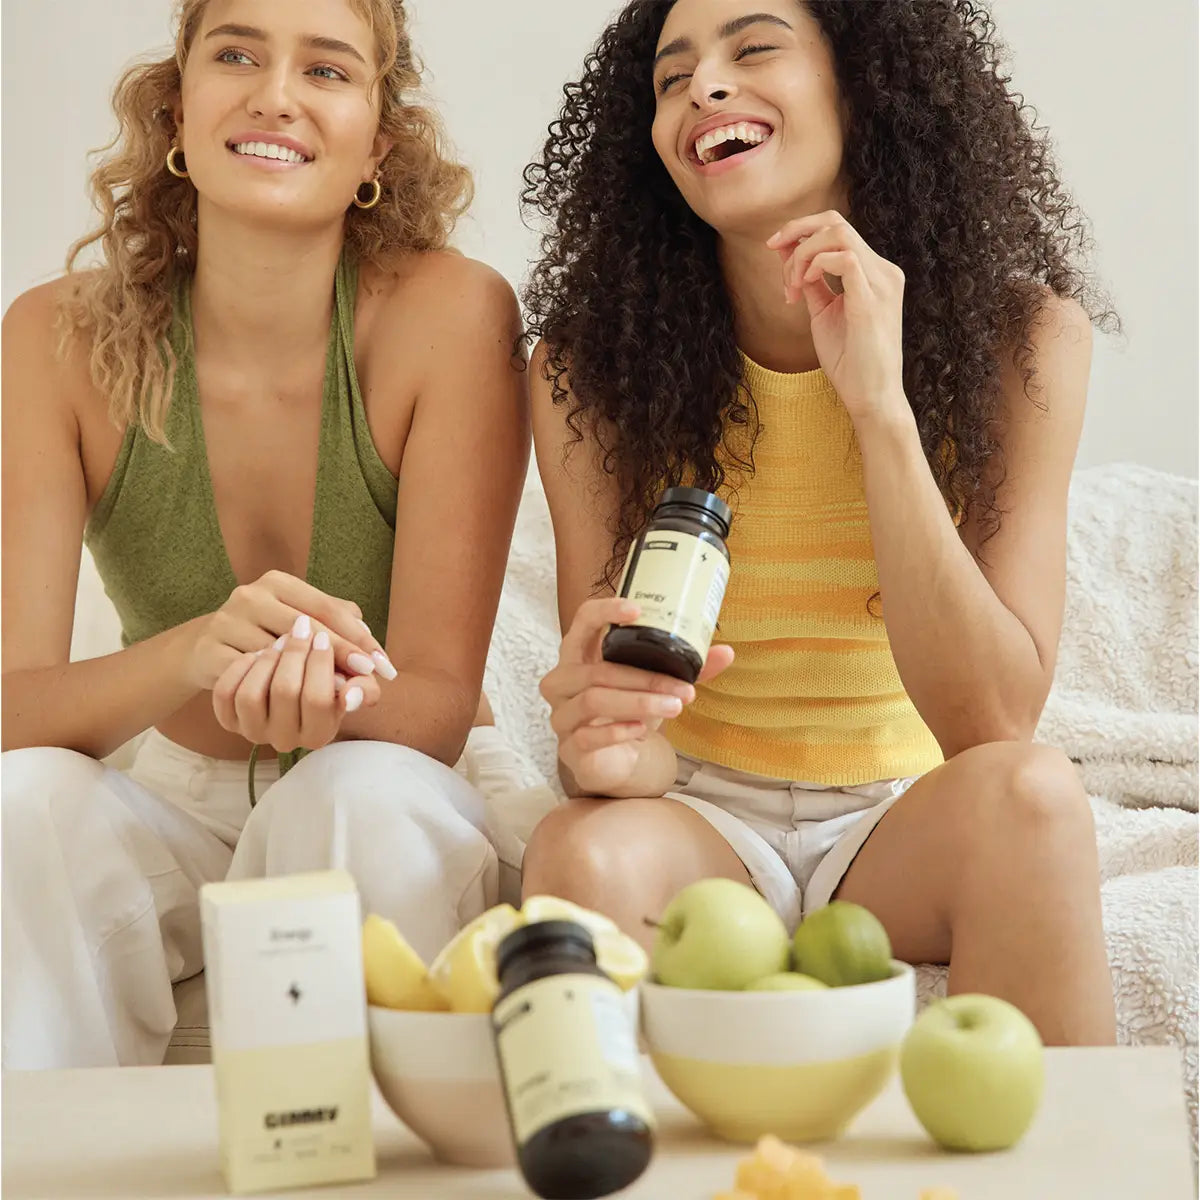 2 young women are eating GIMMY vitamin gummies while smiling. In front of them is a table with fresh fruit and the GIMMY Energy bottle and box on it.